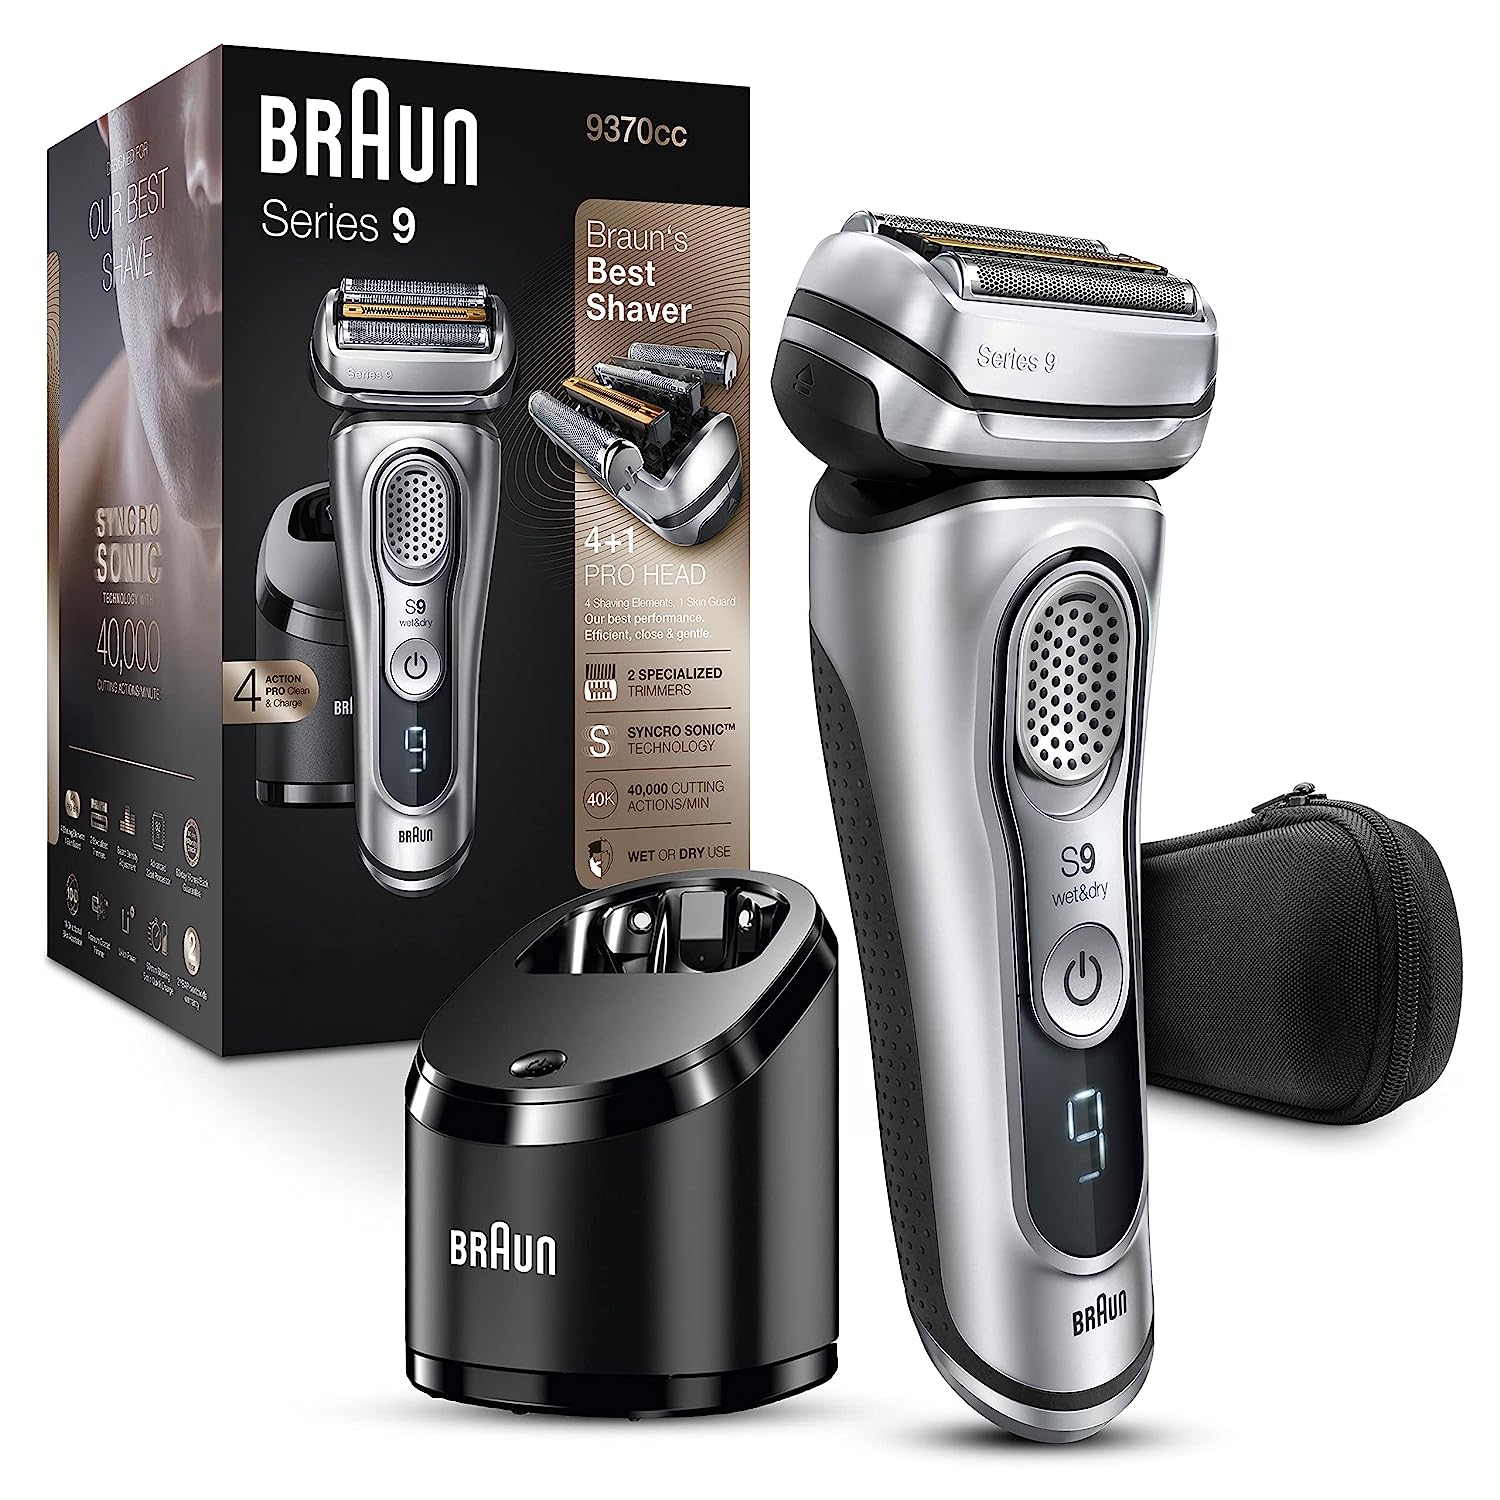 Braun Series 9 9370cc Rechargeable Wet & Dry Men's Electric Shaver